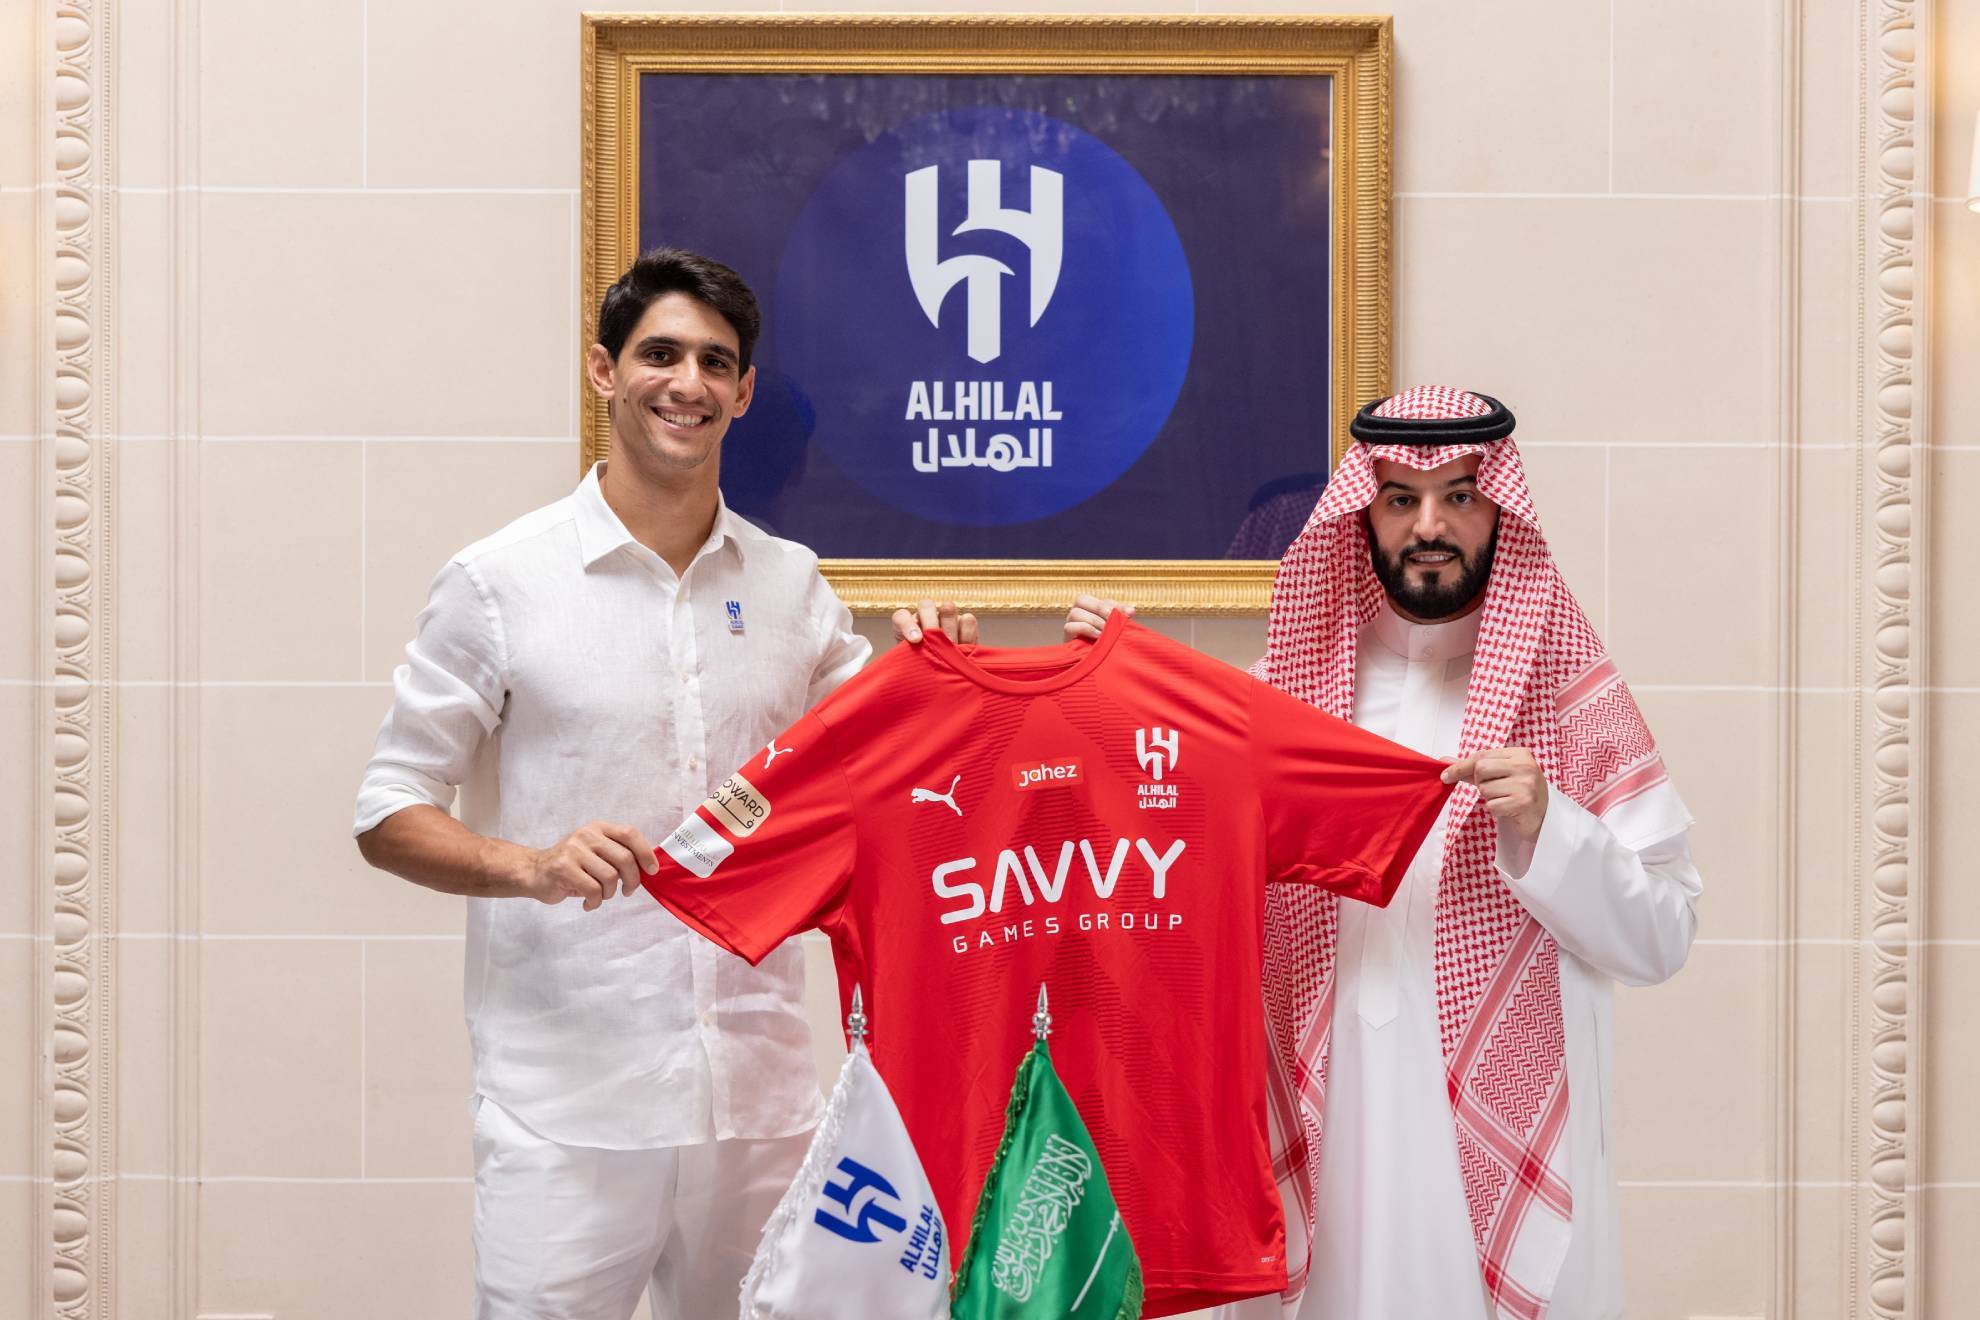 Al Hilal announced Bounous signing